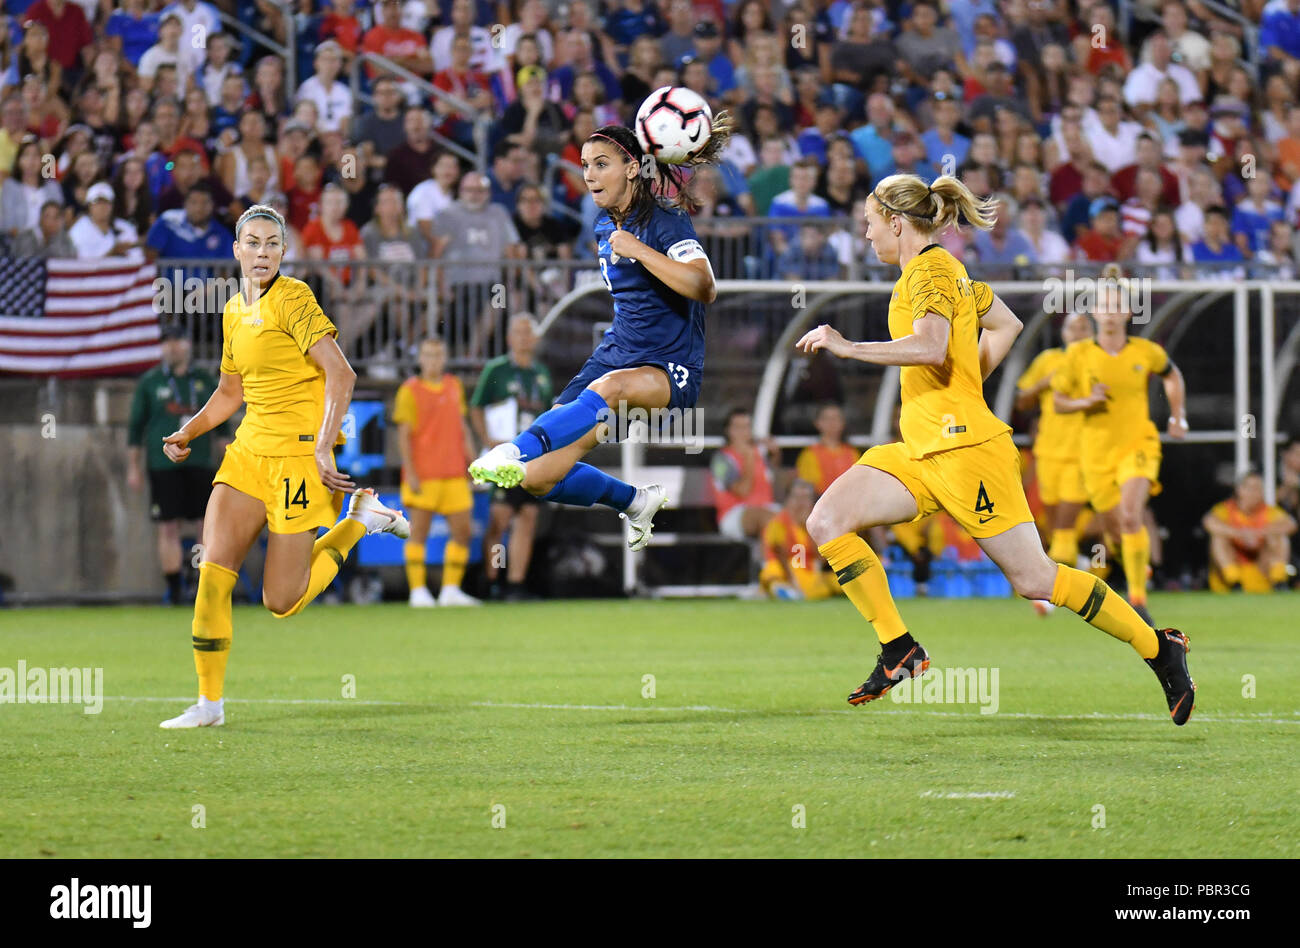 Sunday Aug 29, 2018: Alex Morgan (13) of the USWNT heads a pass during a Tournament of Nations game against Australia at Pratt & Whitney Stadium in East Hartford, Connecticut. Gregory Vasil/CSM Stock Photo